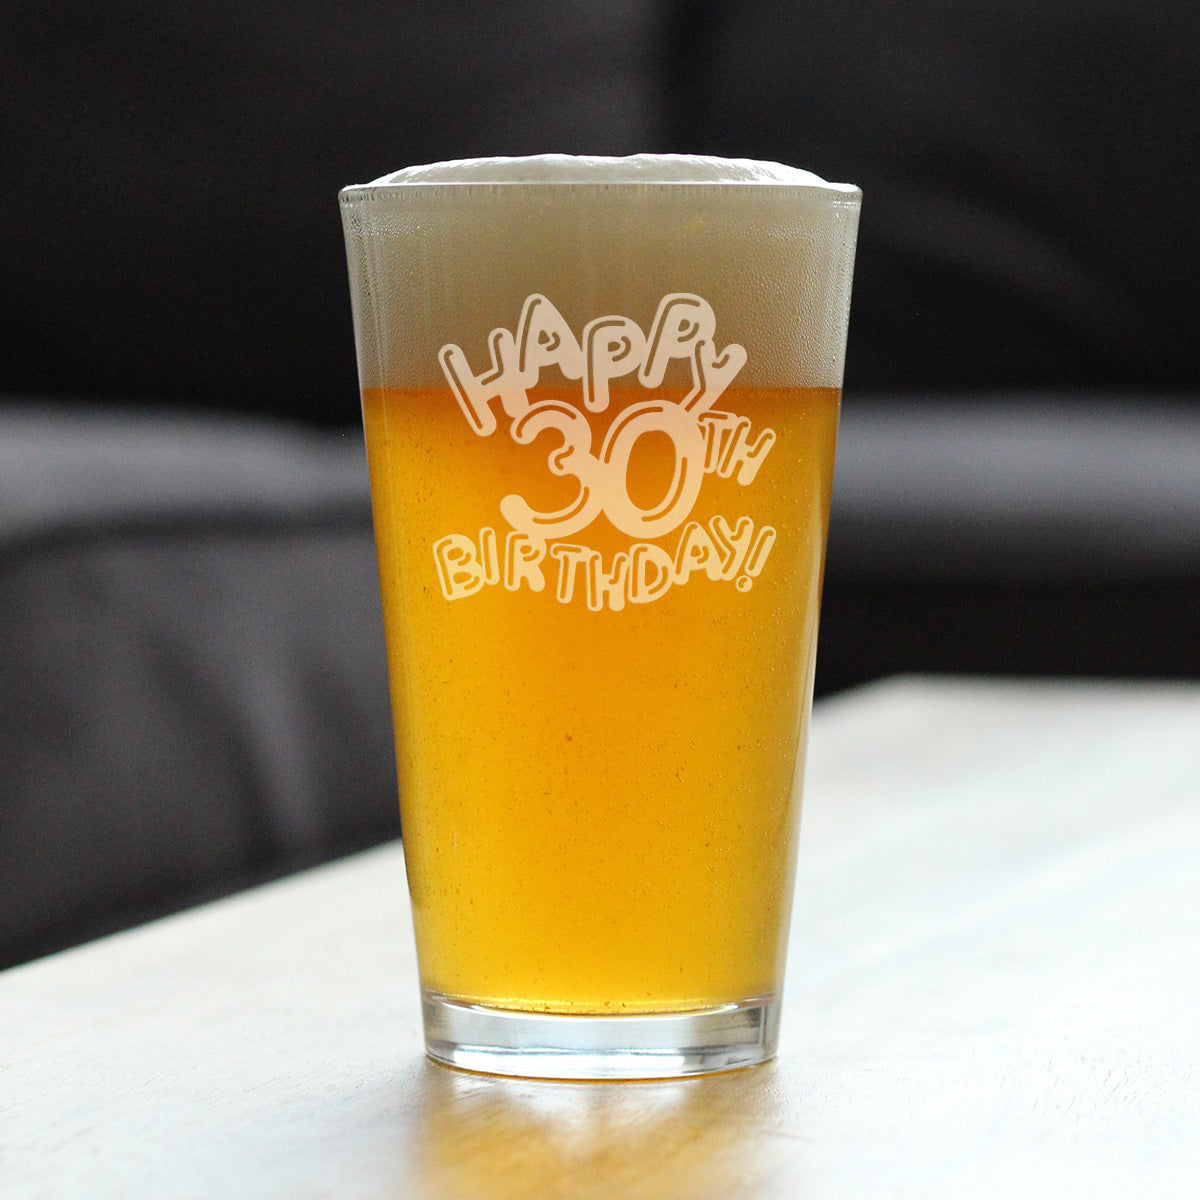 Happy 30th Birthday Balloons - Pint Glass for Beer - Gifts for Women &amp; Men Turning 30 - Fun Bday Party Decor - 16 Oz